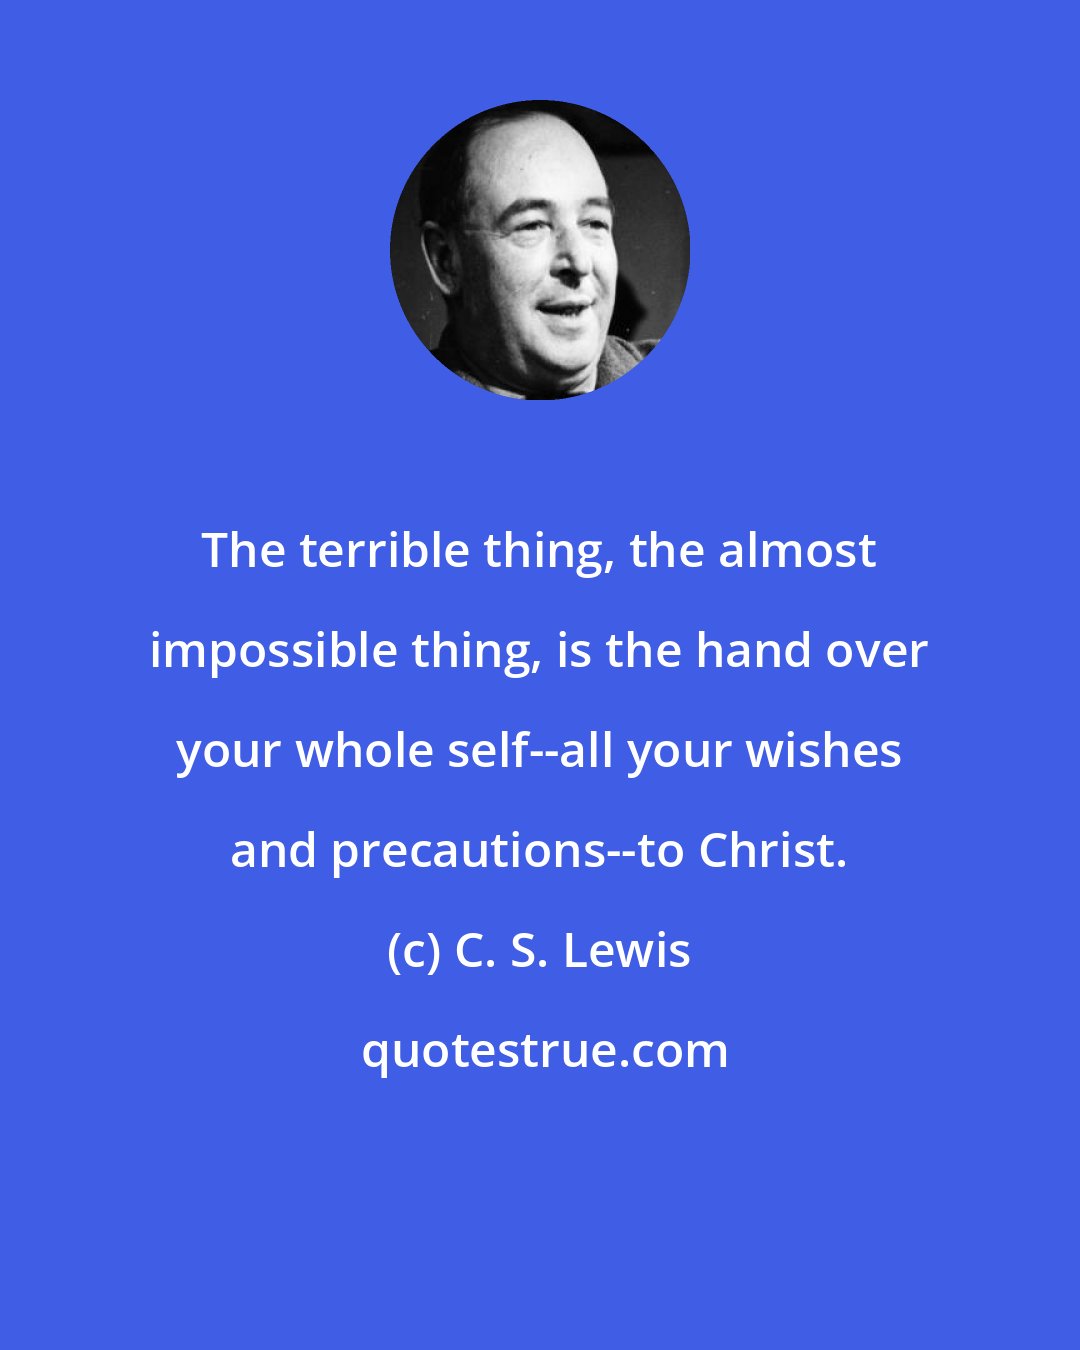 C. S. Lewis: The terrible thing, the almost impossible thing, is the hand over your whole self--all your wishes and precautions--to Christ.